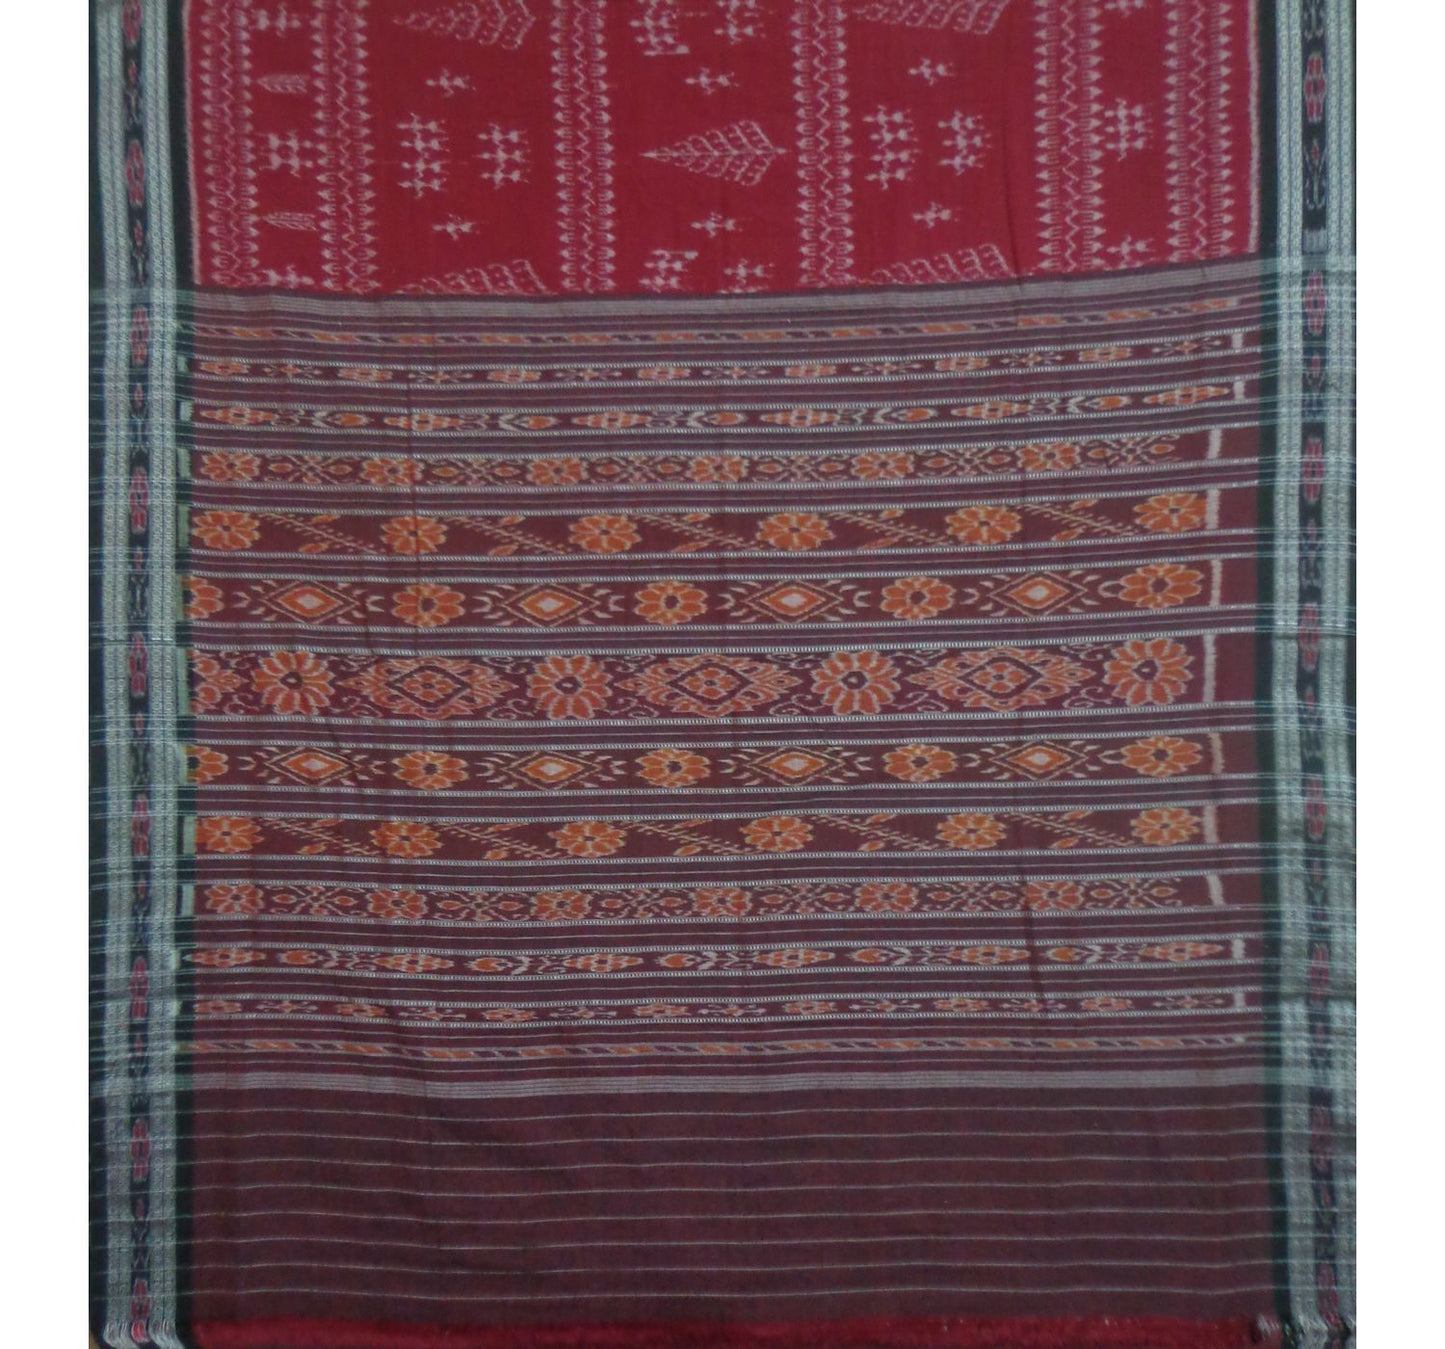 Red with Tribal Art Designed Handwoven Cotton Saree